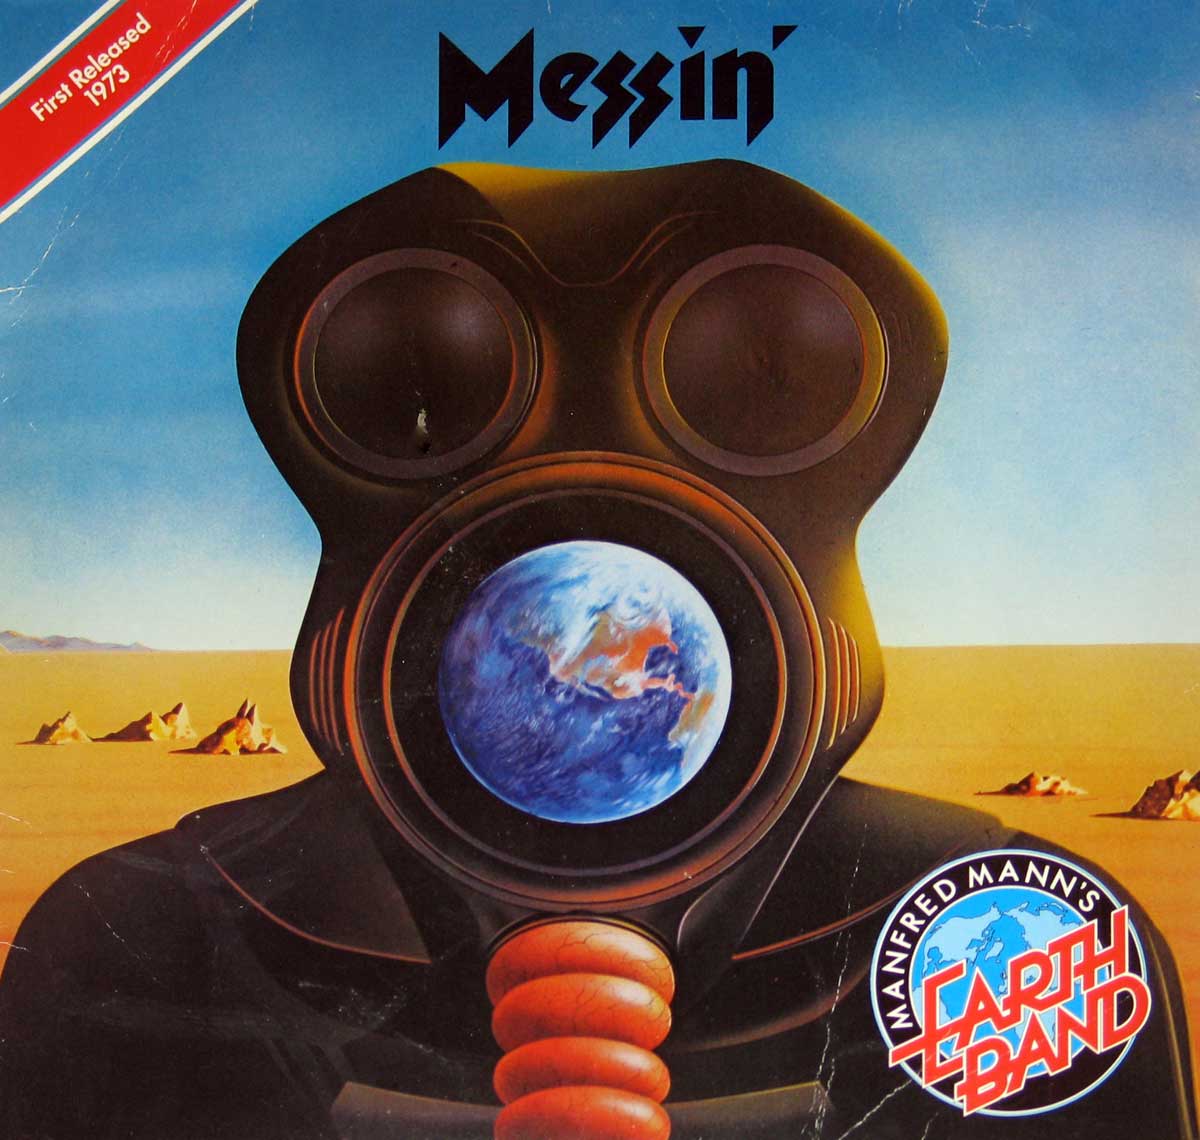 MANFRED MANN's EARTH BAND - Messin Gatefold  (England and German Releases)  album front cover vinyl record